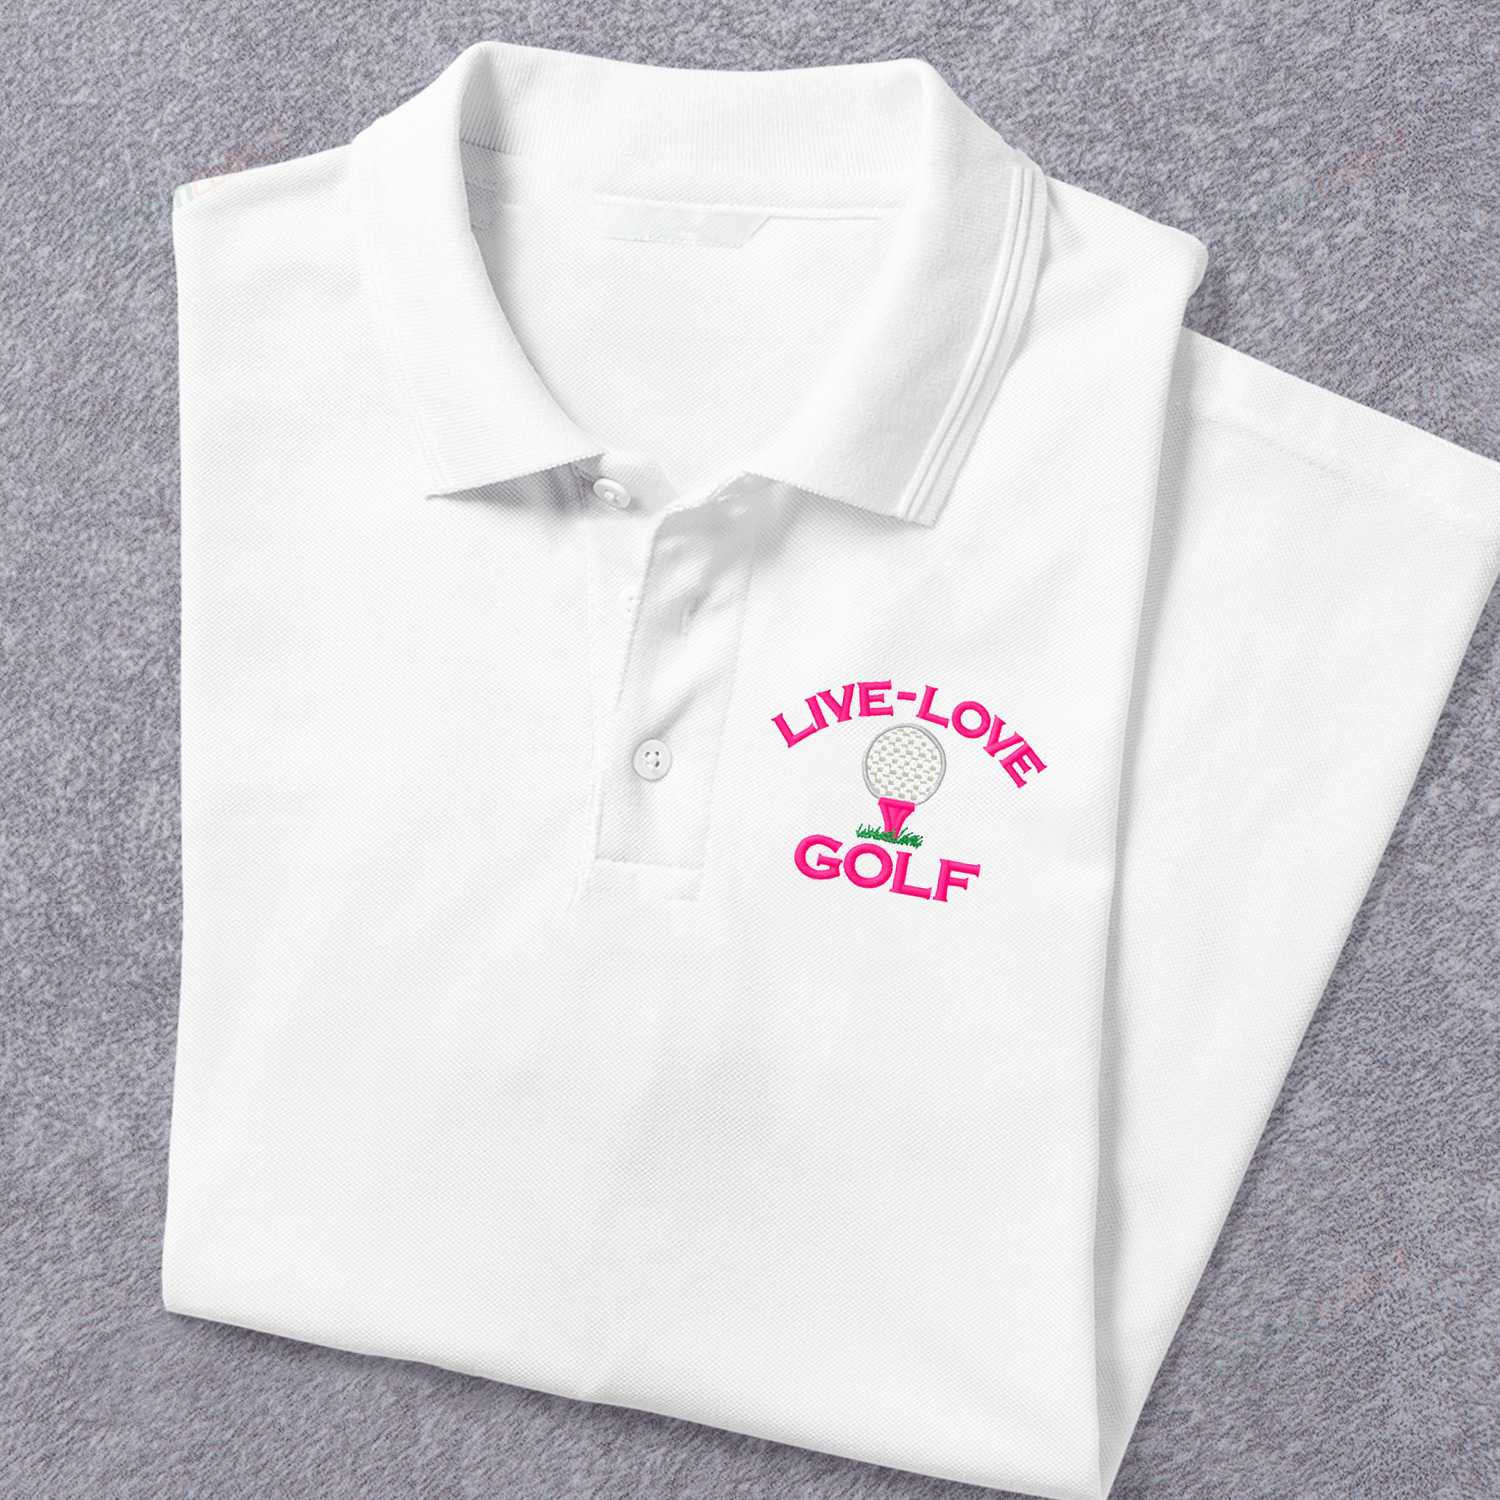 Live-Love Golf Shirts Embroidery Polo Shirts For Women Or Men/ Golf Embroidery Shirt